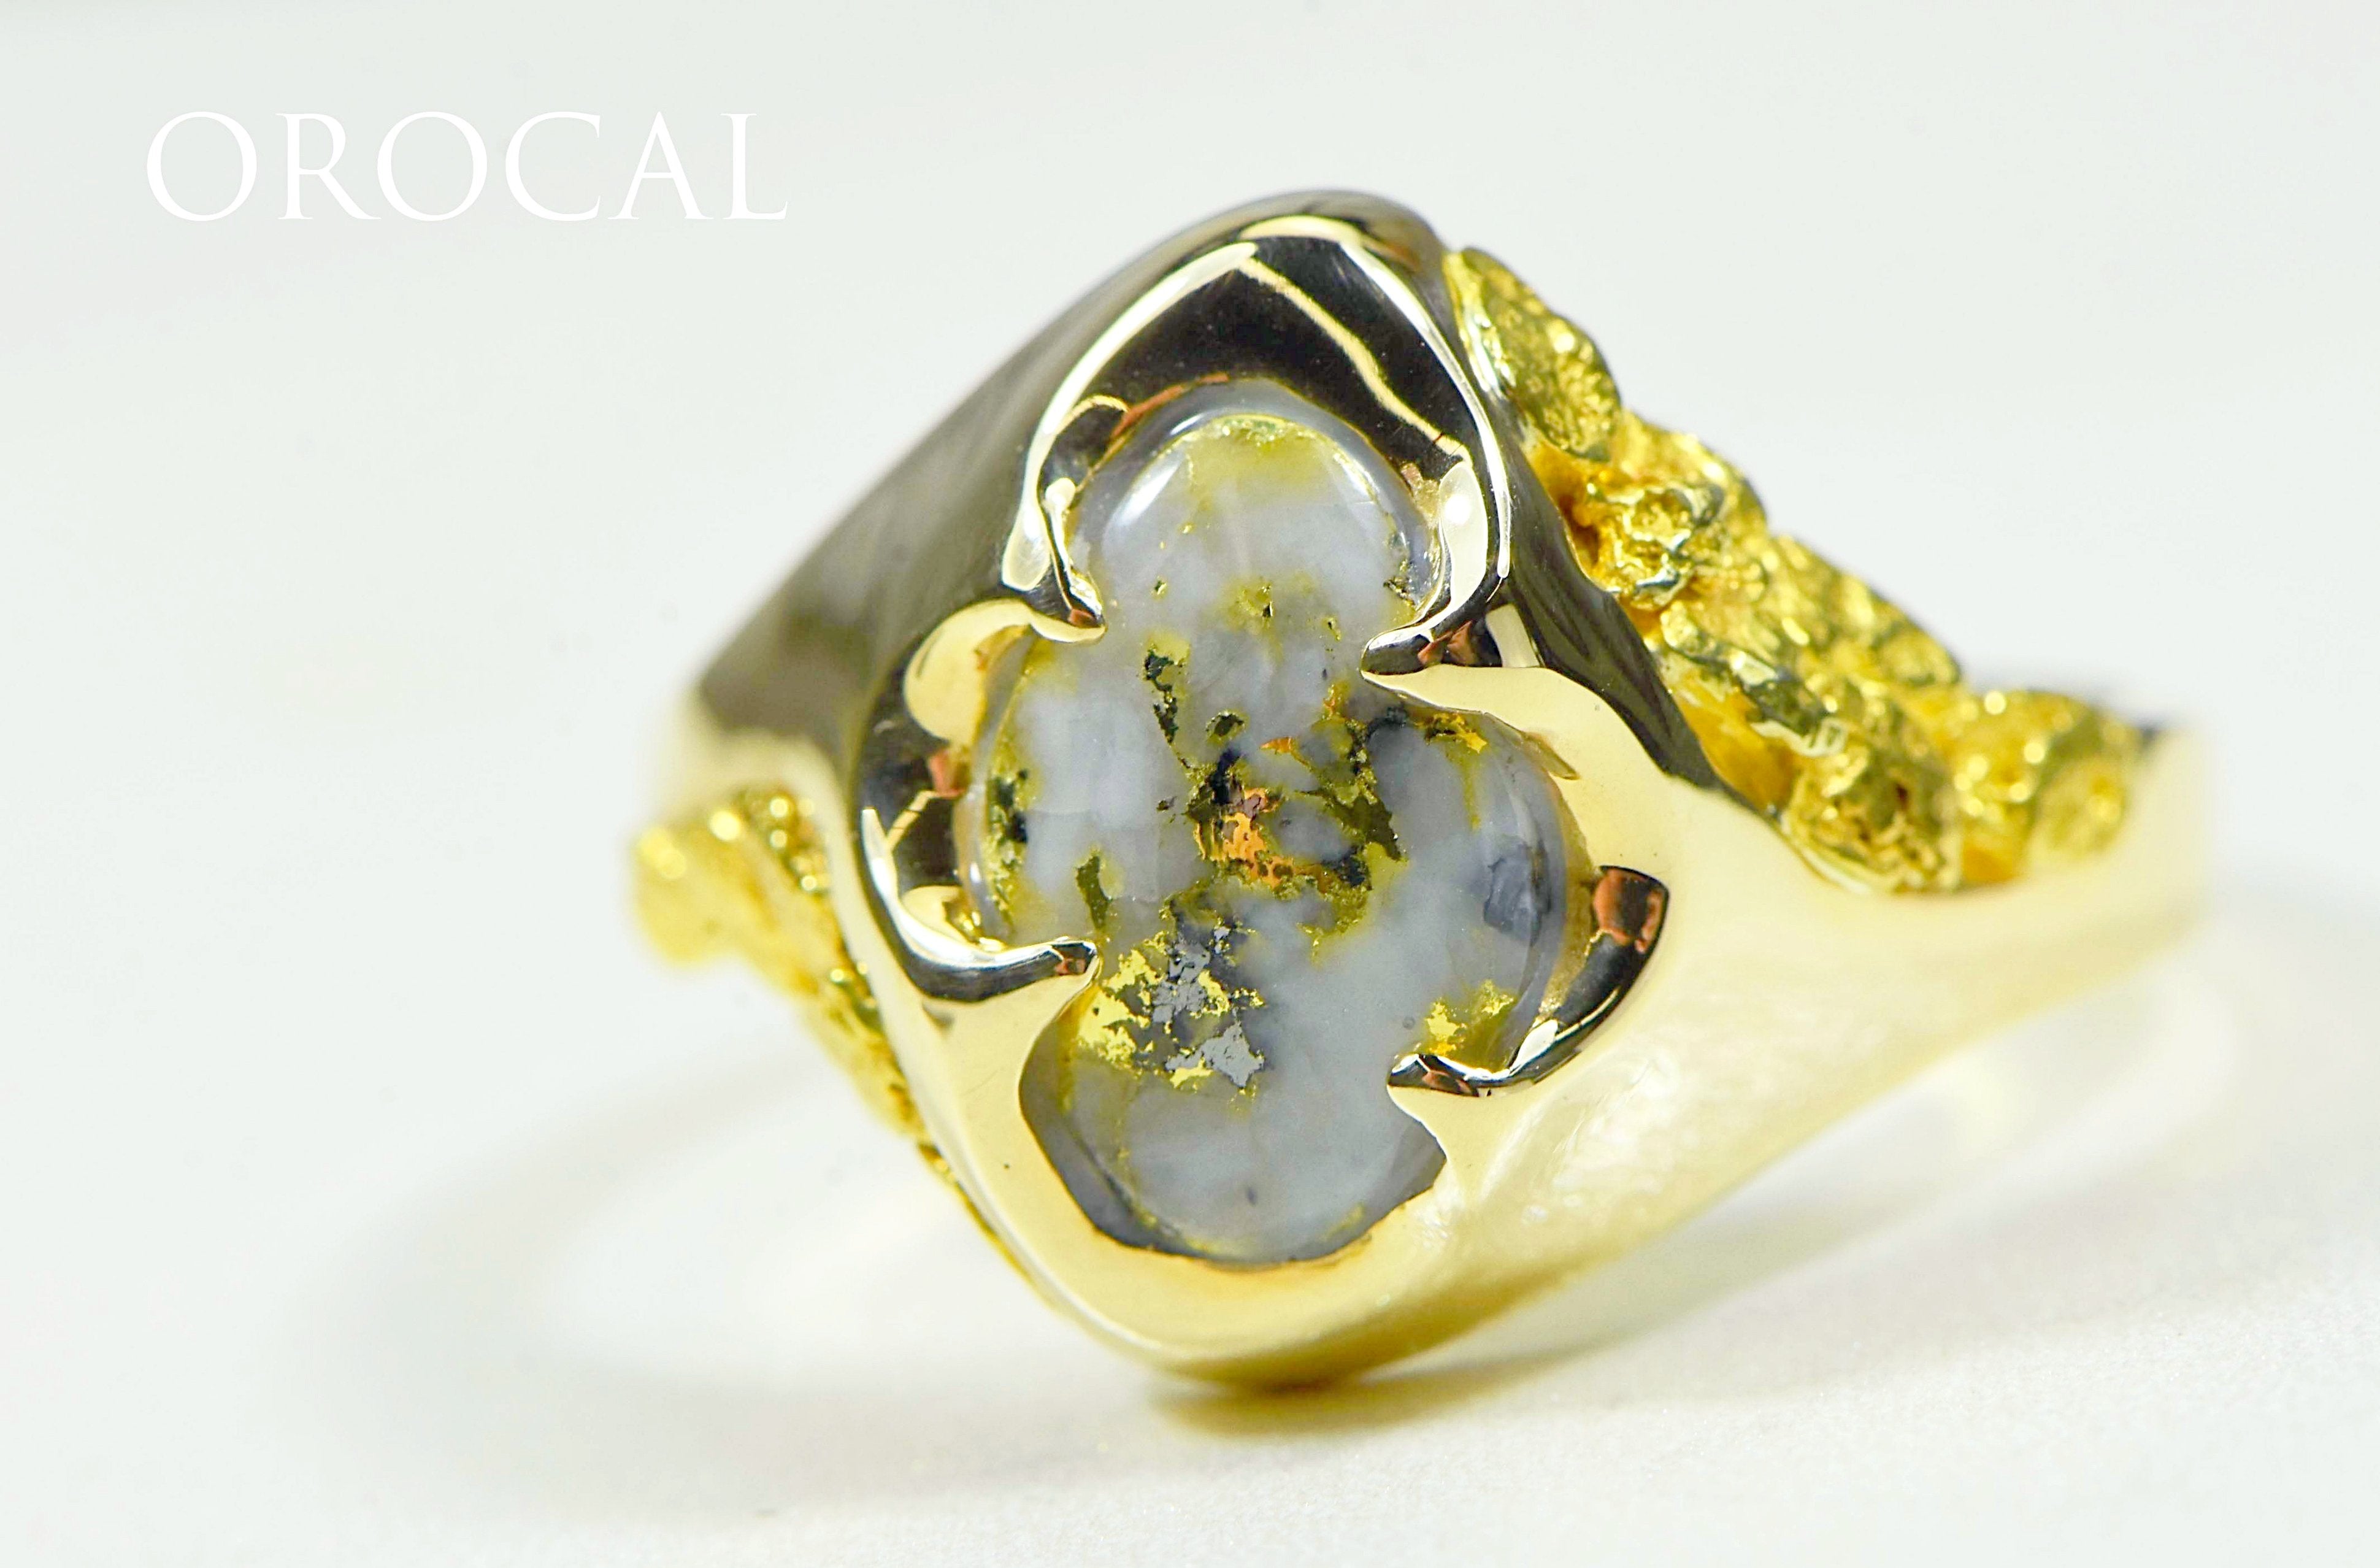 Gold Quartz Ring "Orocal" RMEQ109 Genuine Hand Crafted Jewelry - 14K Gold Casting